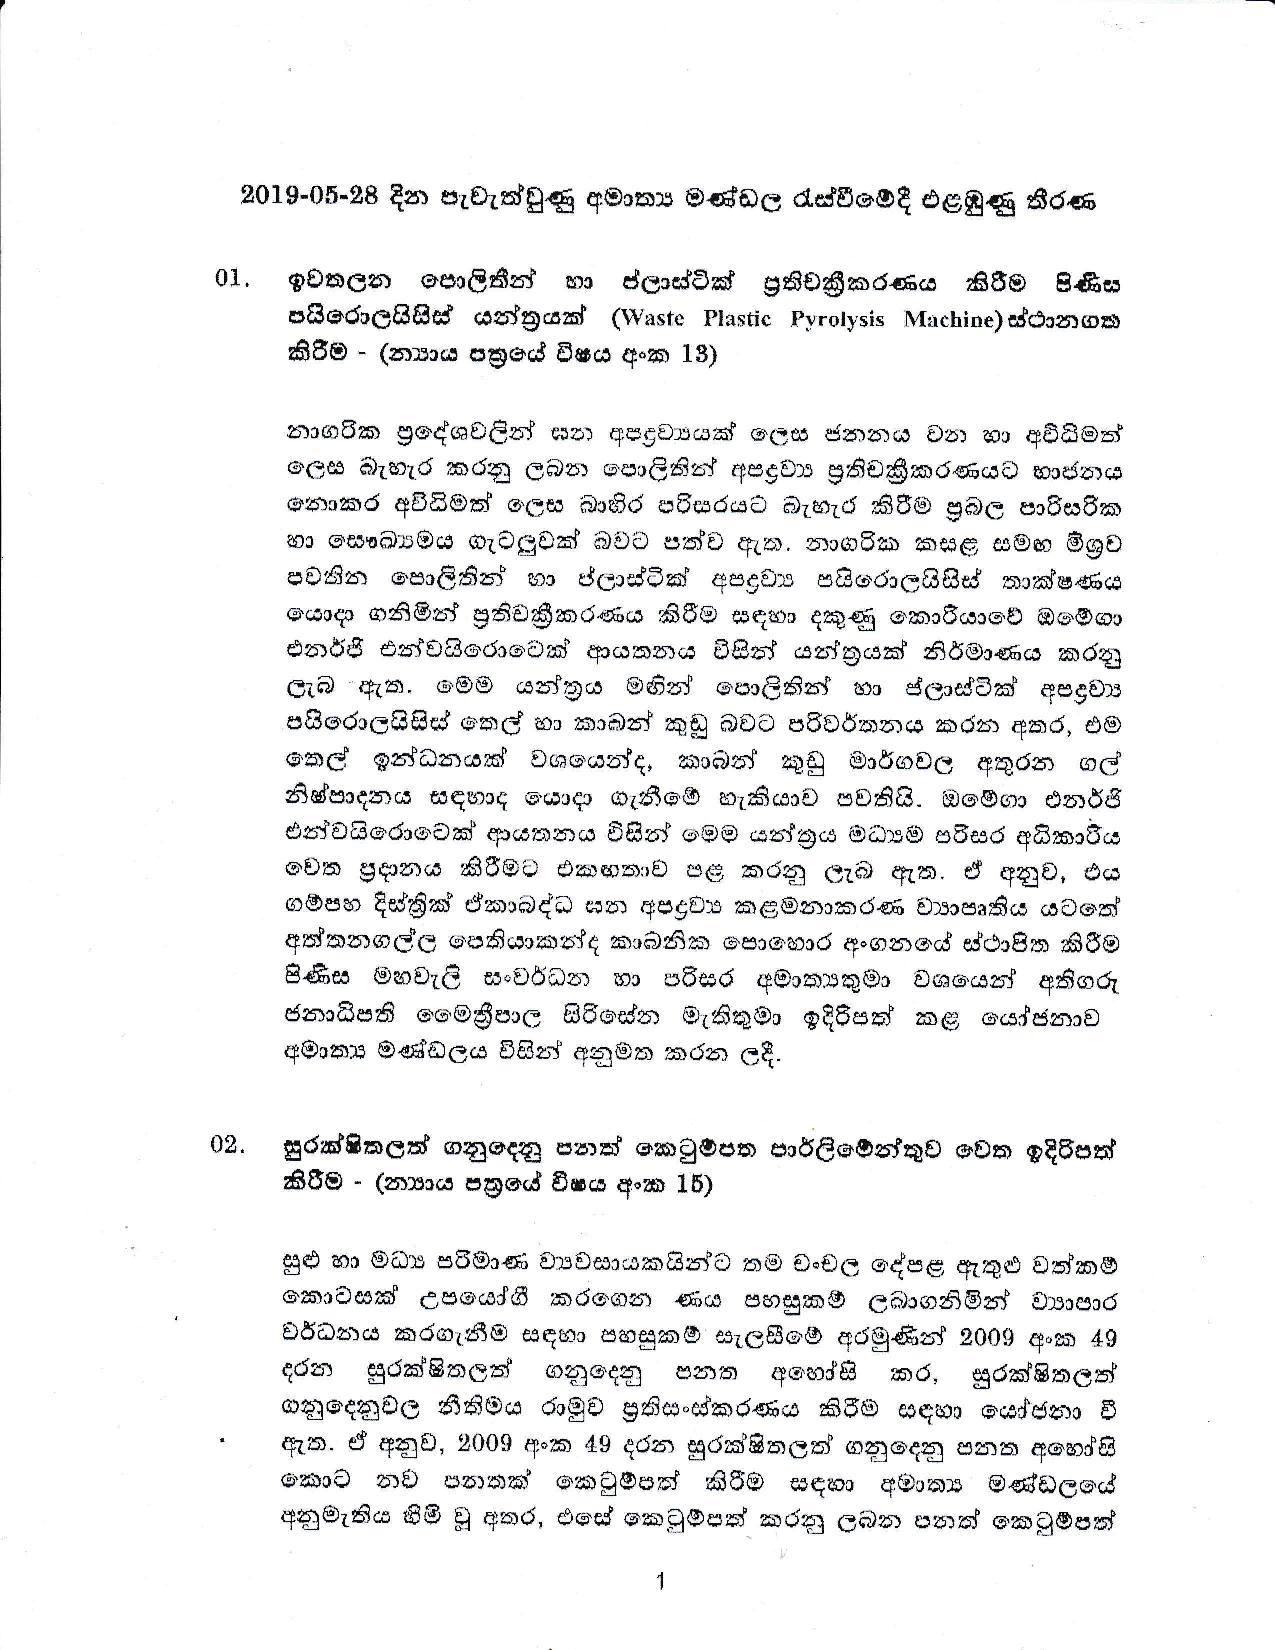 Cabinet Decision on 28.05.2019 page 001